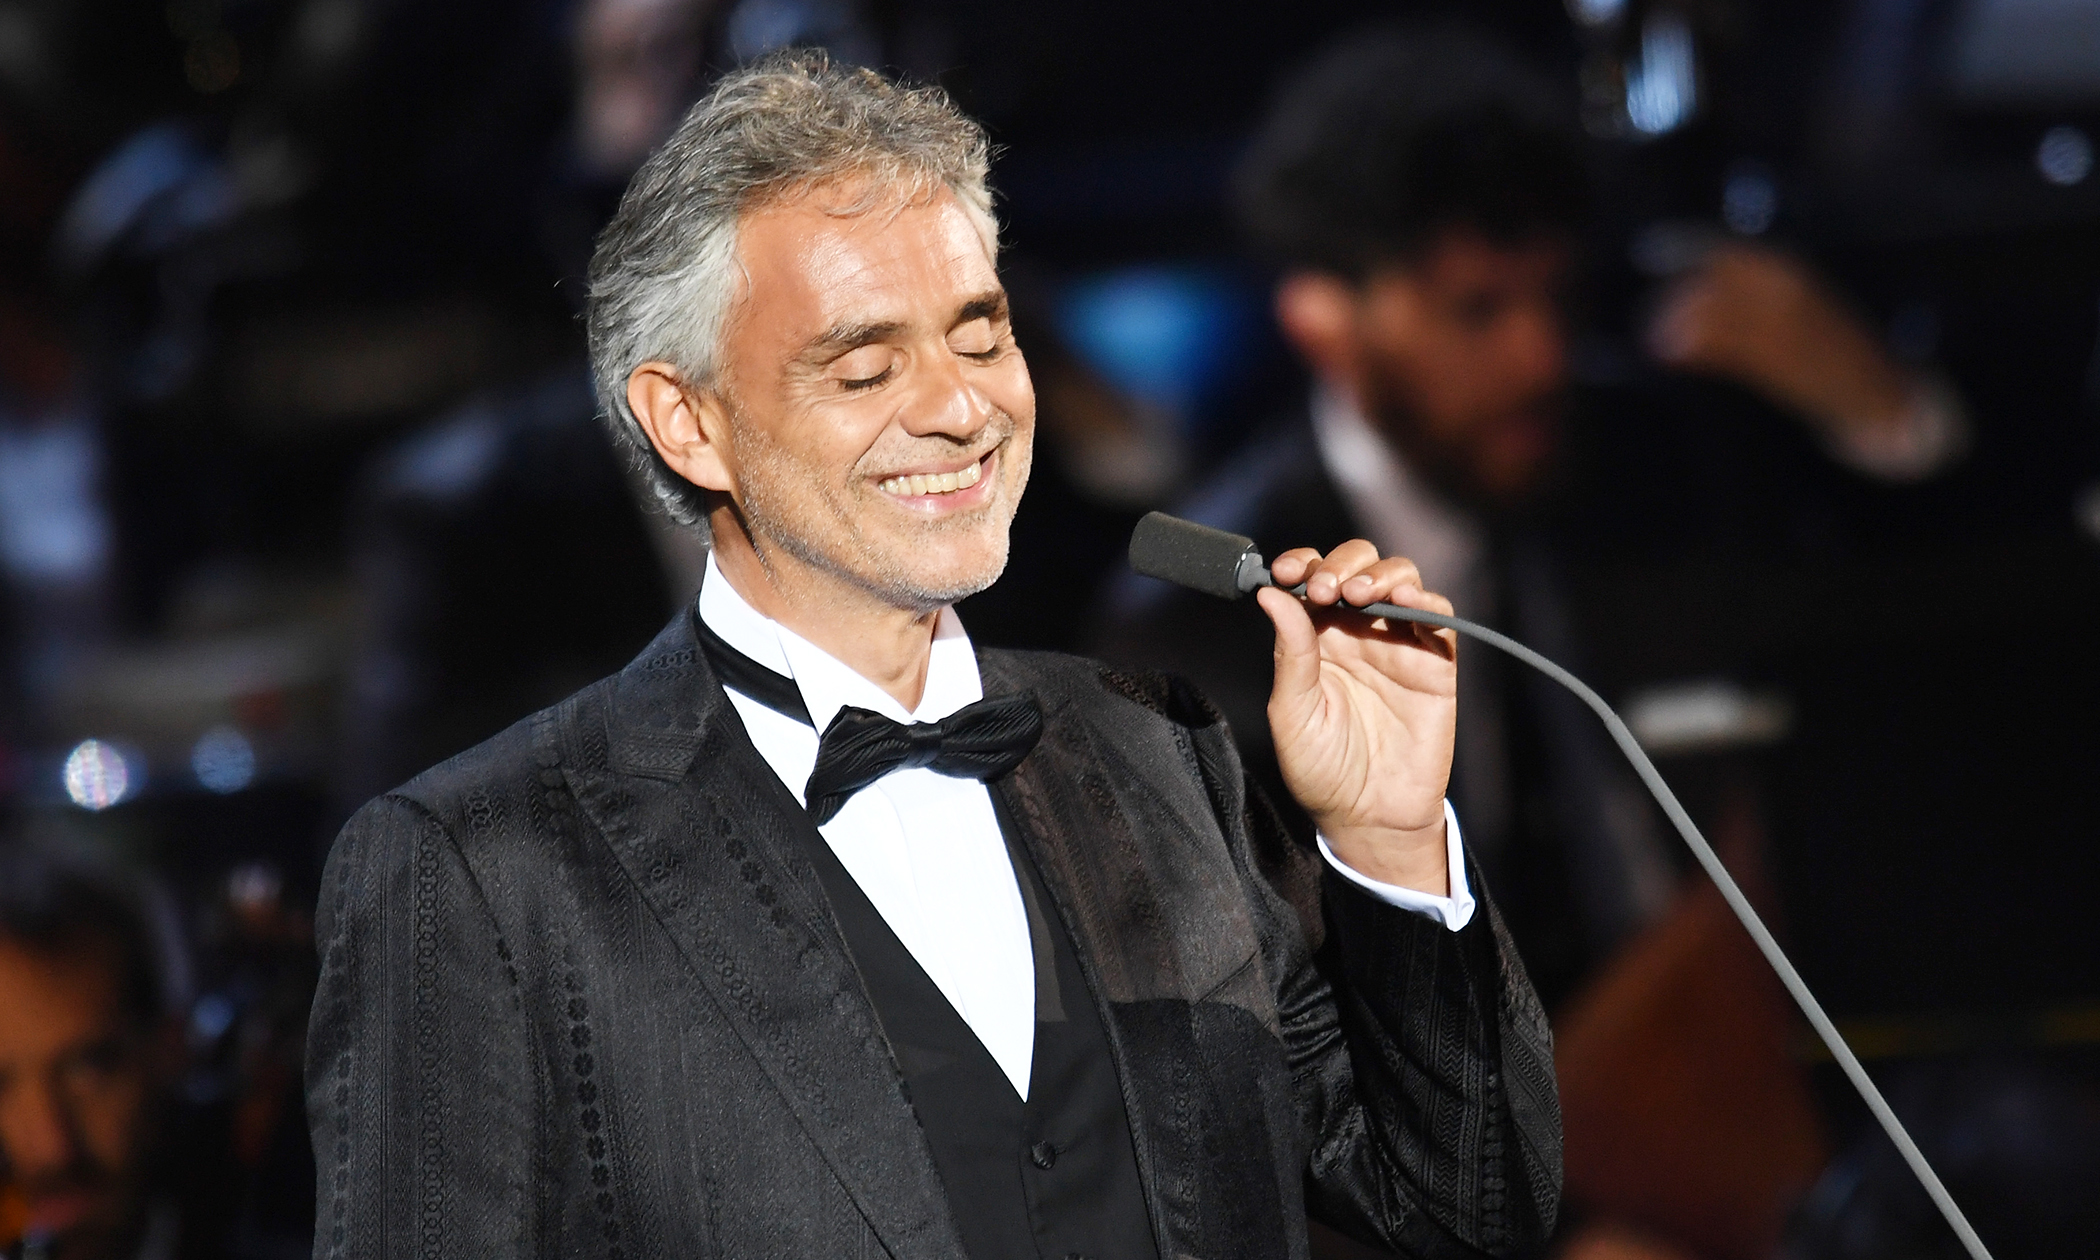 Doctors Wanted To Abort Singer Andrea Bocelli But His Mom Refused